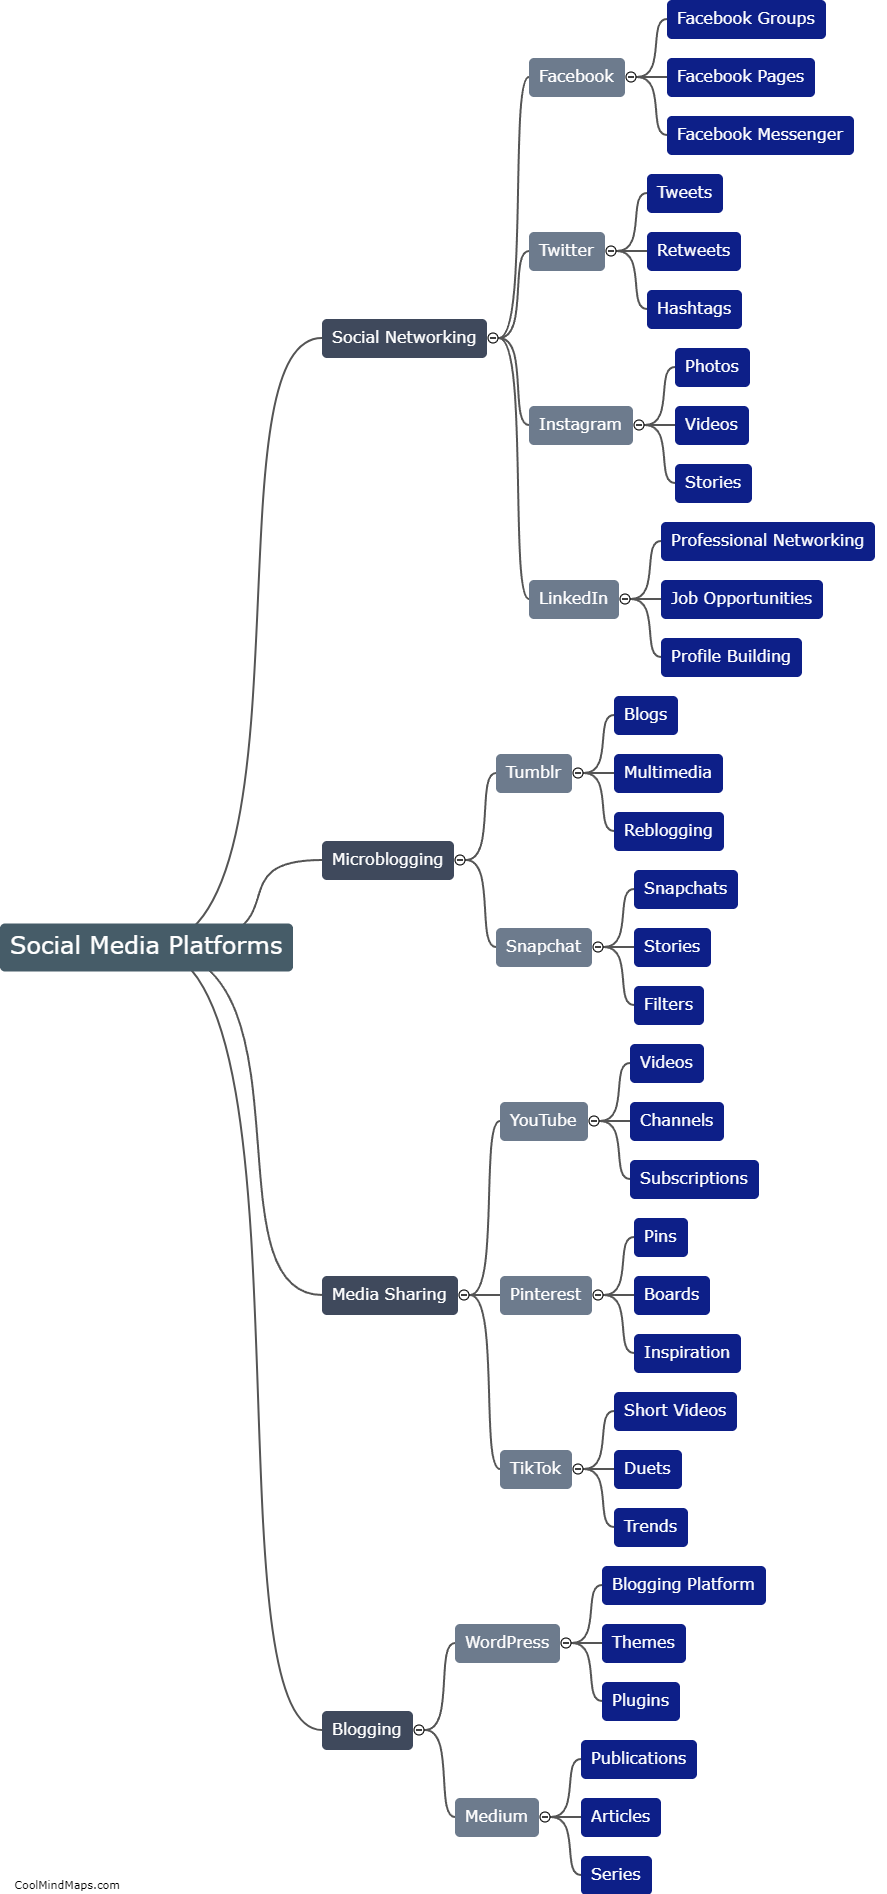 What are the different types of social media platforms?